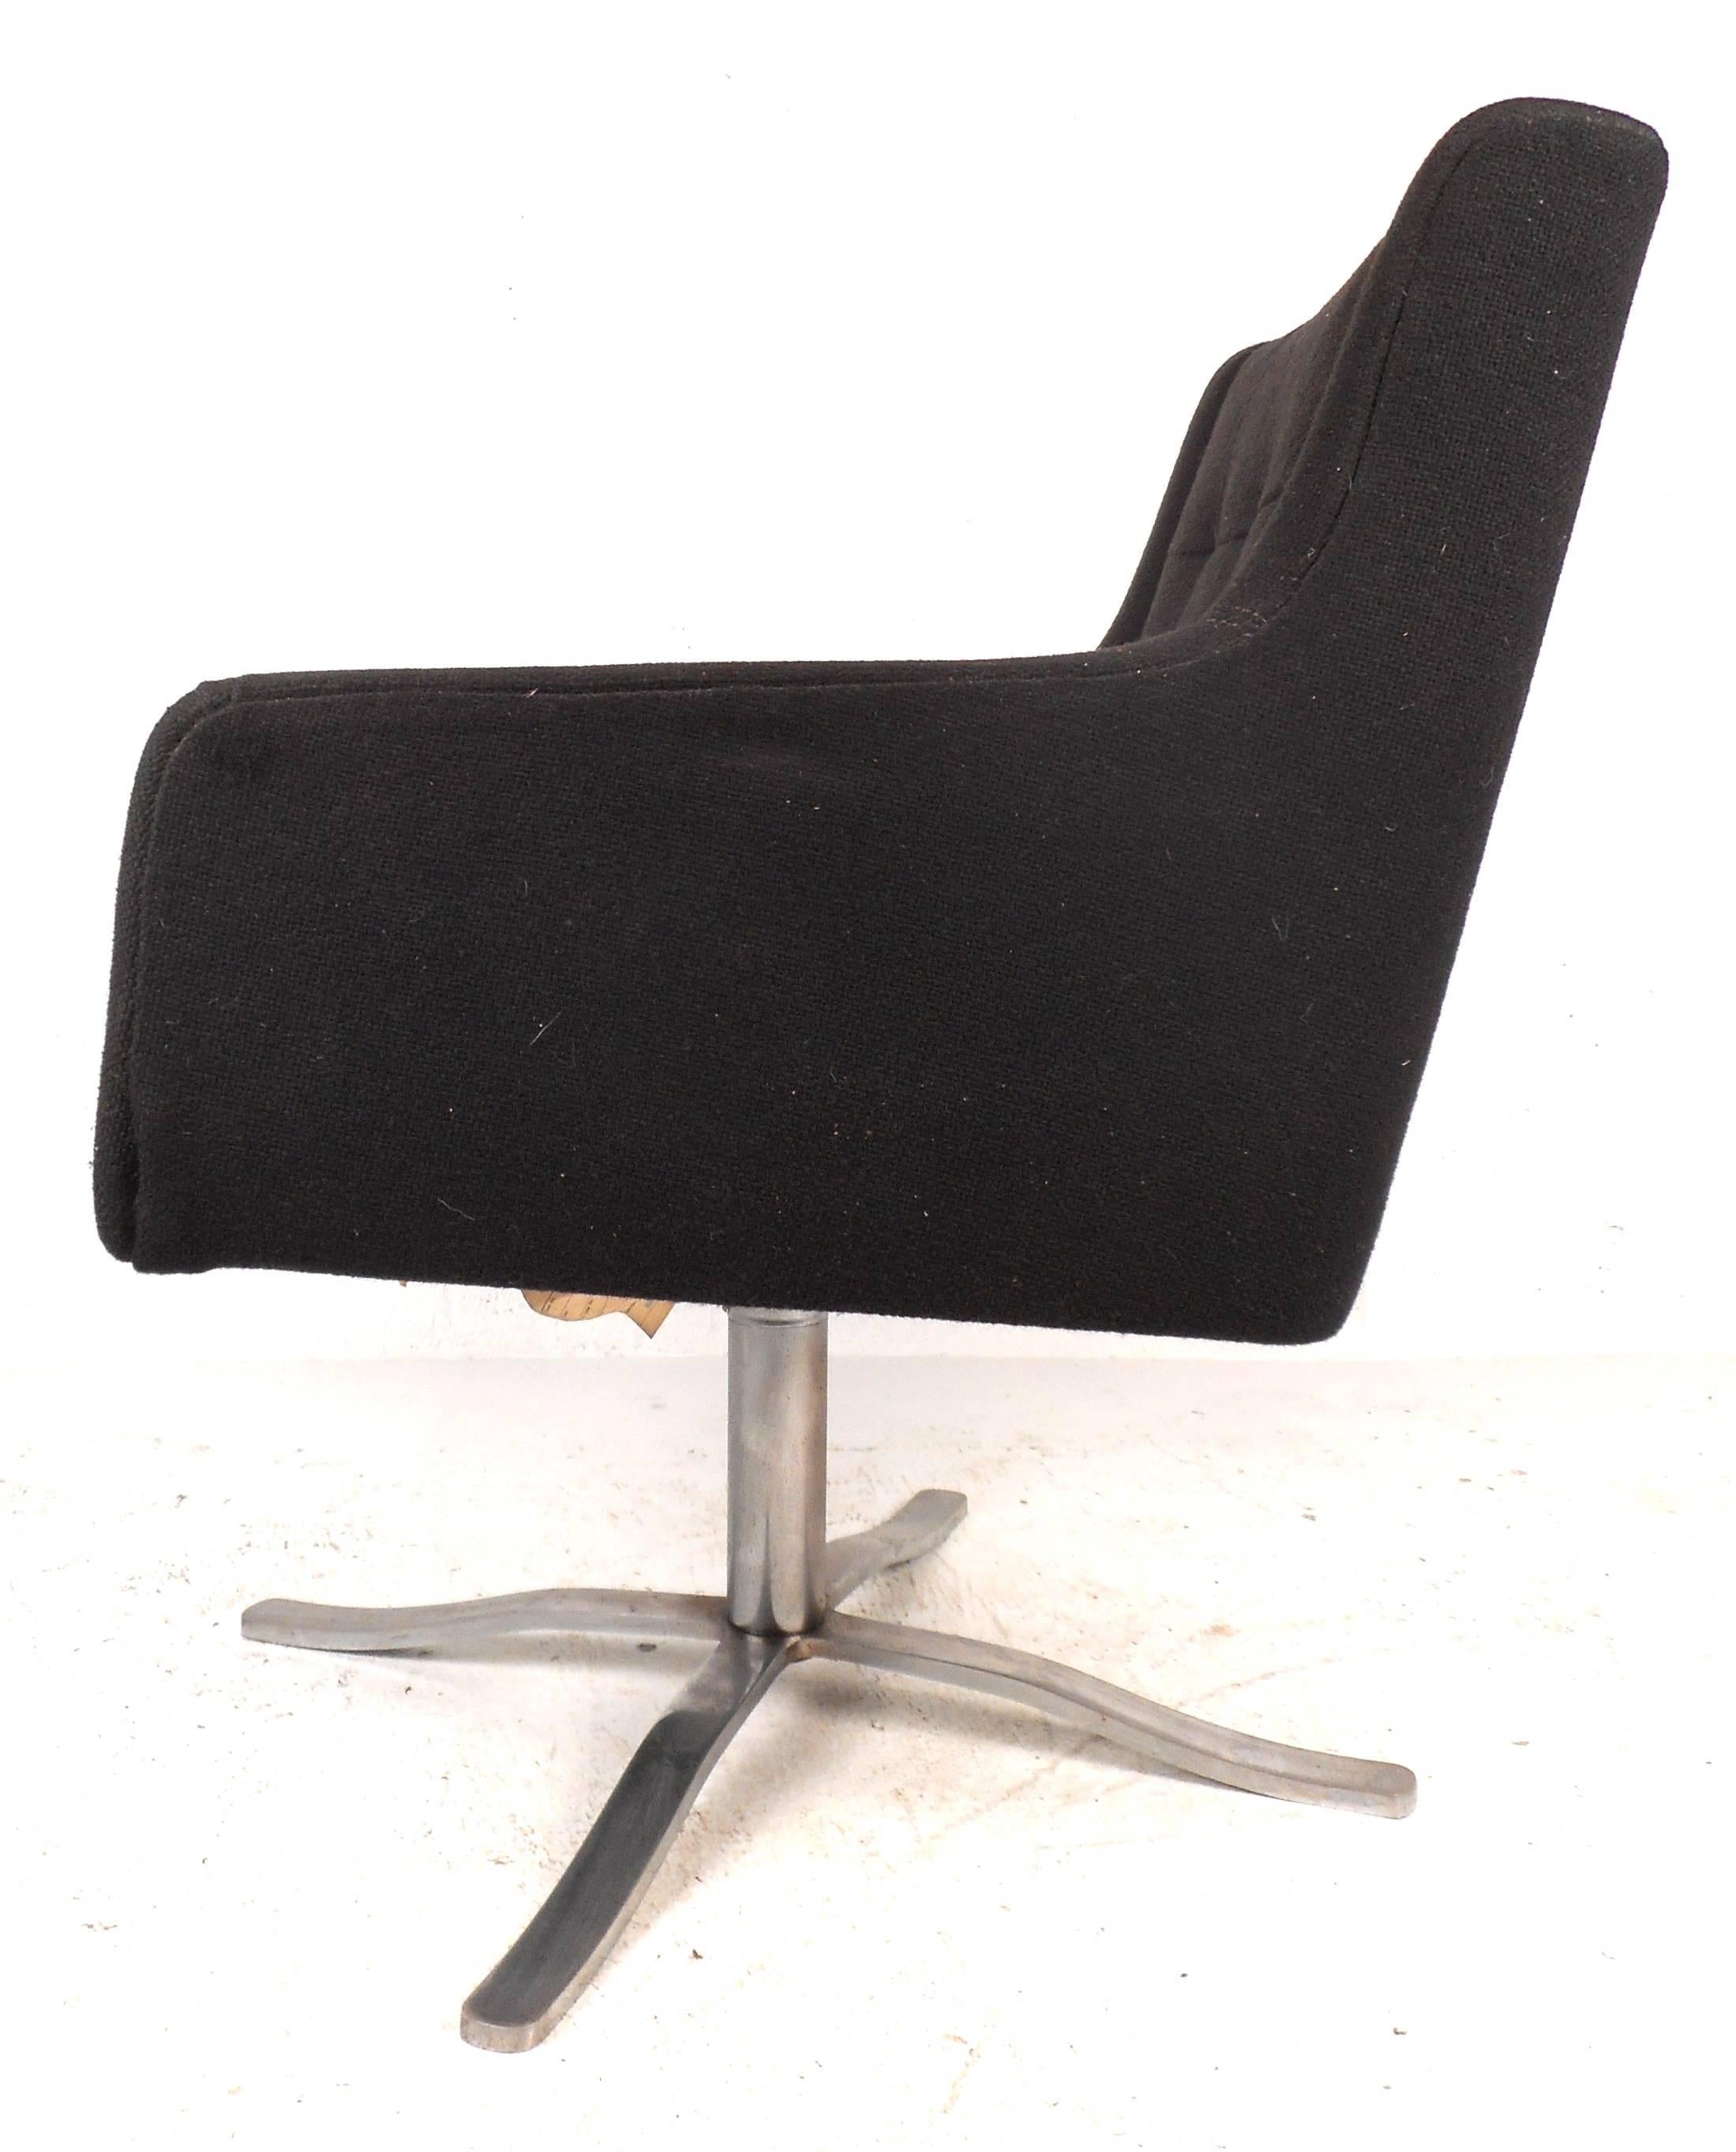 Lovely Mid-Century lounge chair features a tufted backrest, heavy chrome swivel base, and vintage black stitched upholstery. Unique yet simple design provides comfort and style in any interior. Please confirm item location (NY or NJ).